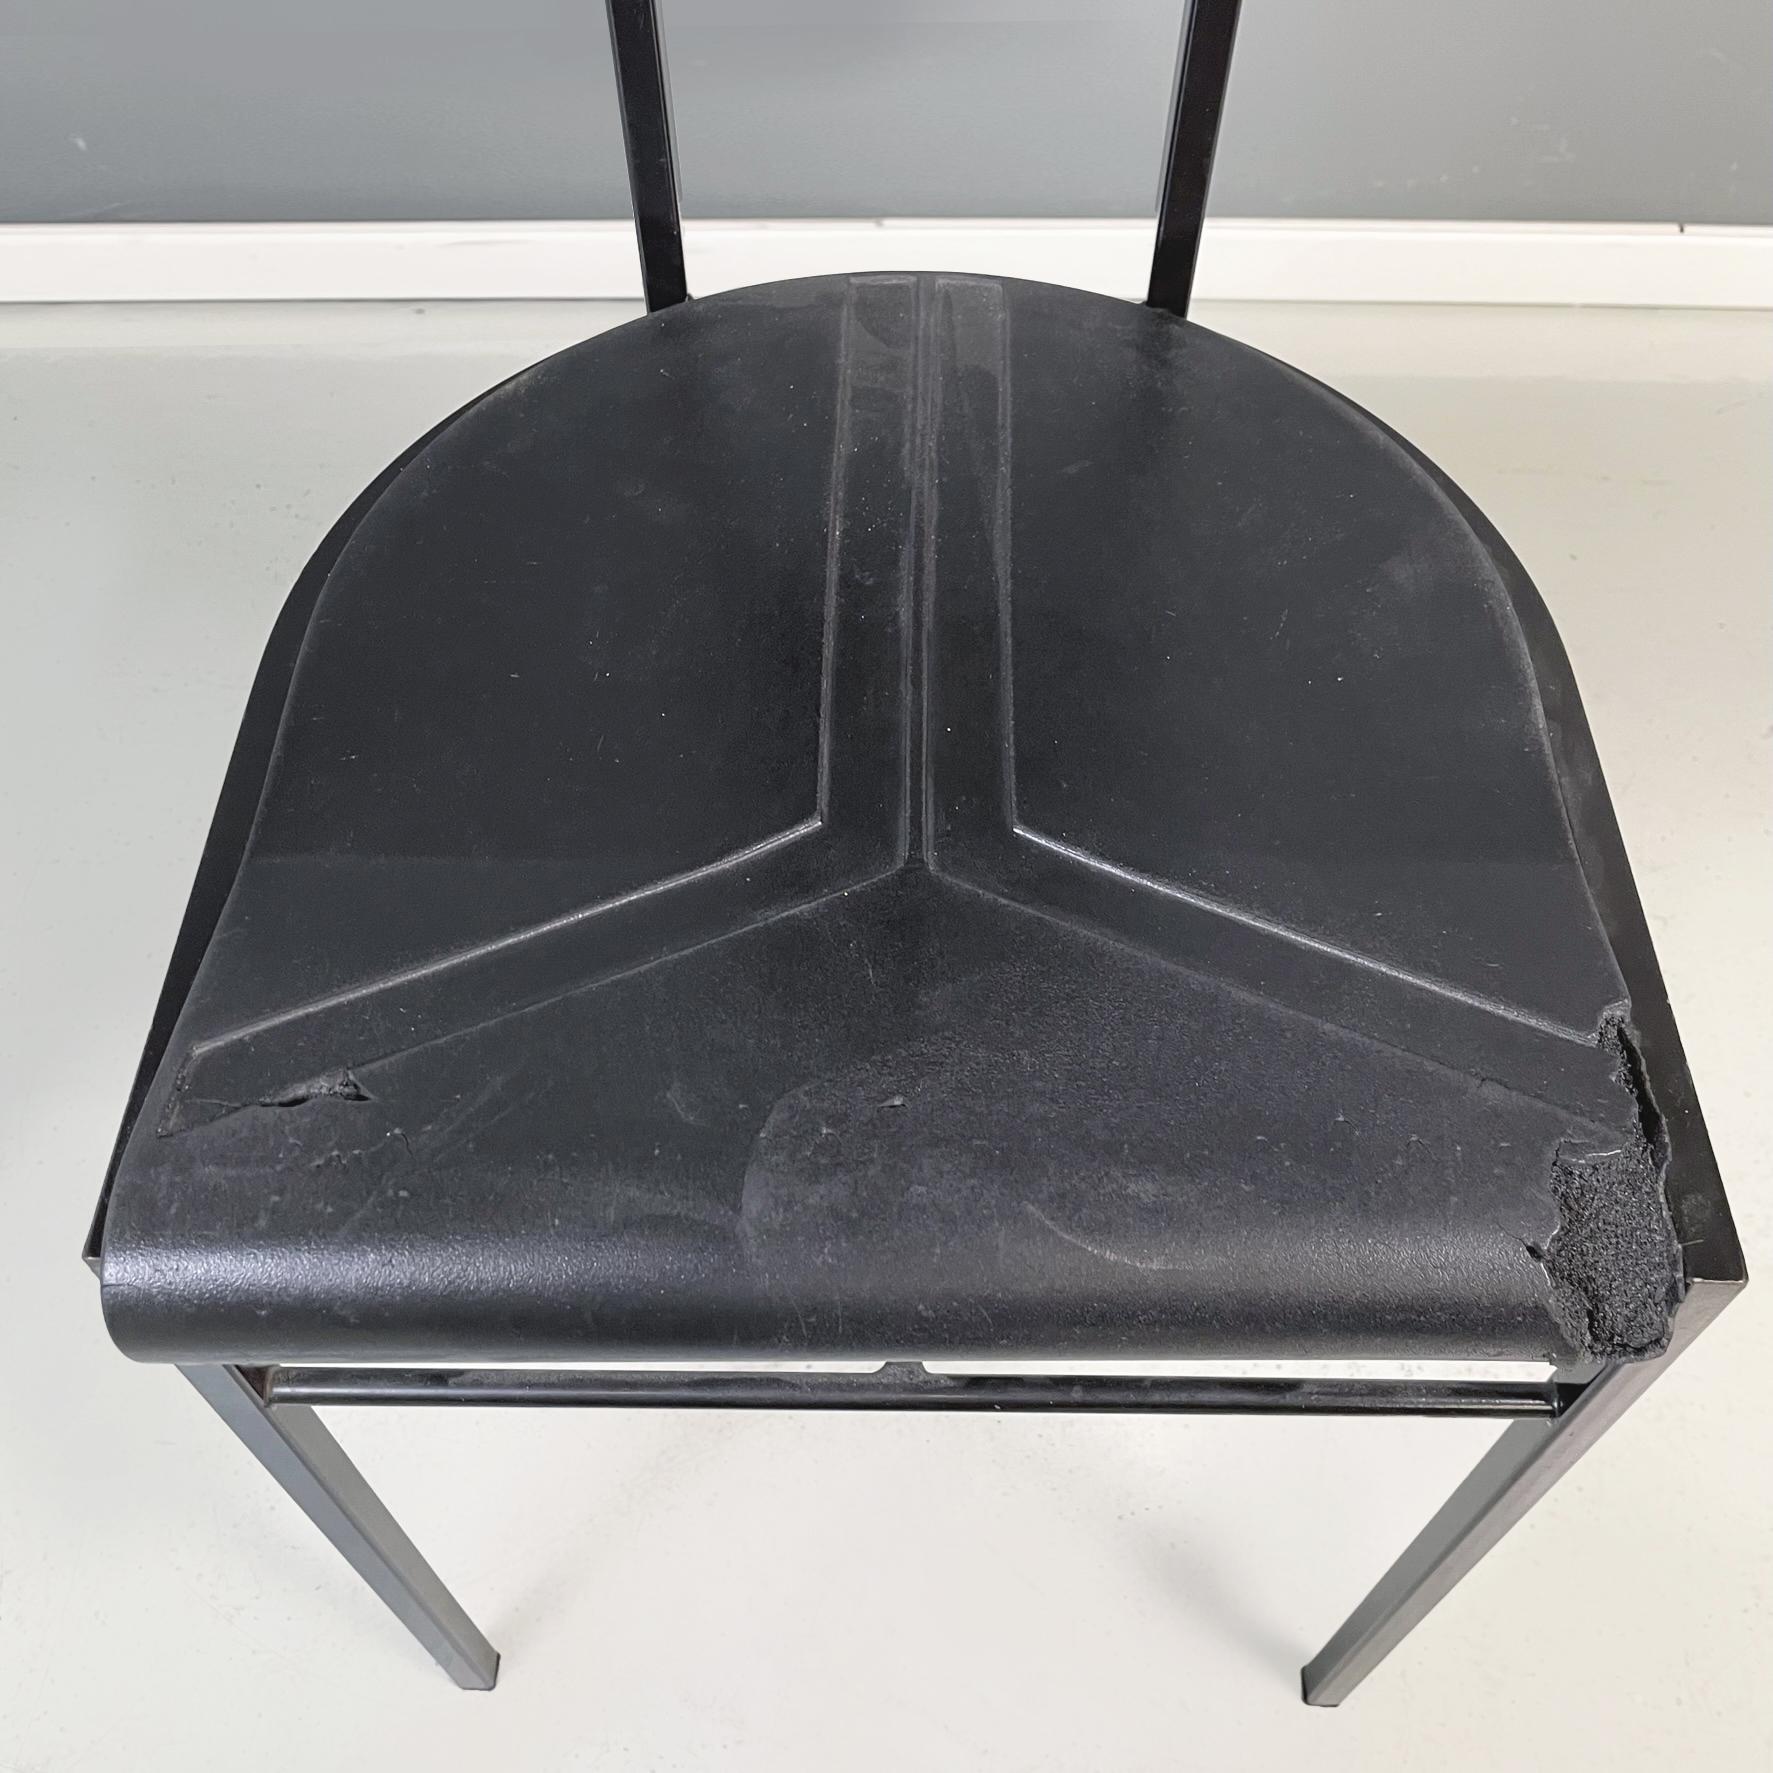 Italian Modern Black Metal and Rubber Chair by Zeus, 1990s For Sale 5